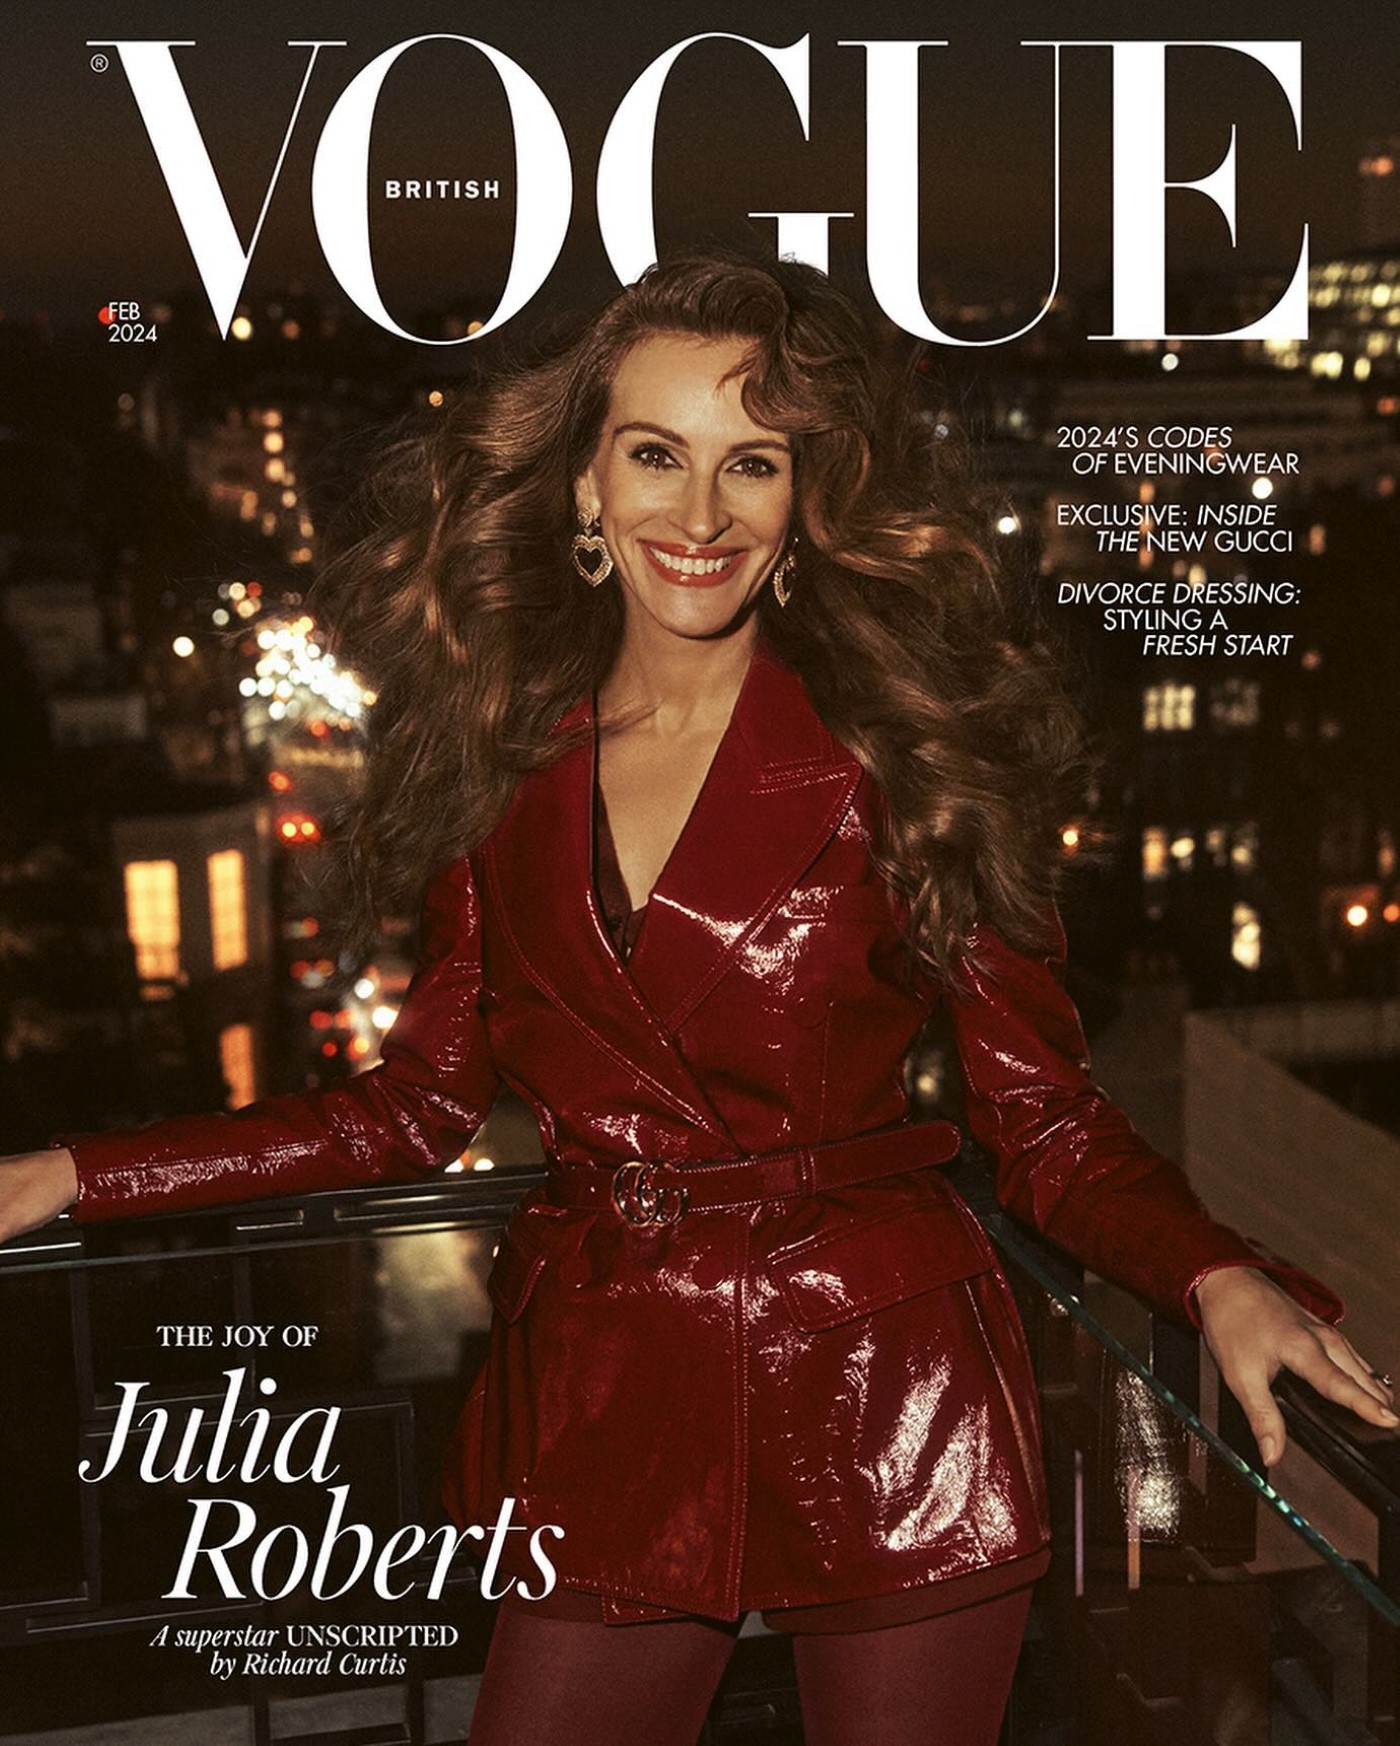 Julia Roberts covers British Vogue February 2024 by Lachlan Bailey